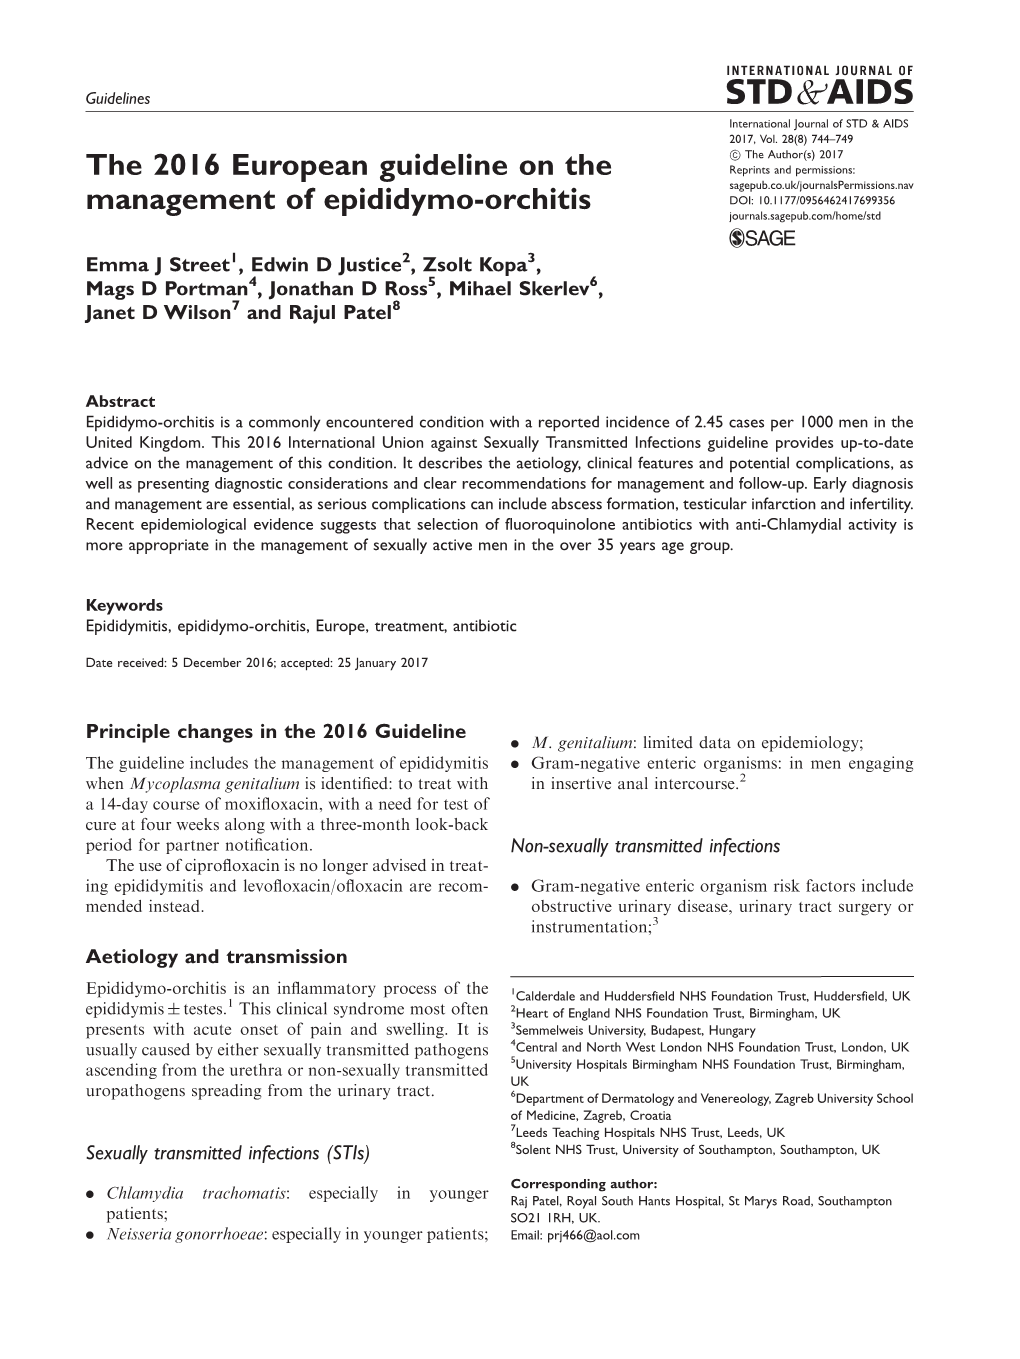 The 2016 European Guideline on the Management of Epididymo-Orchitis